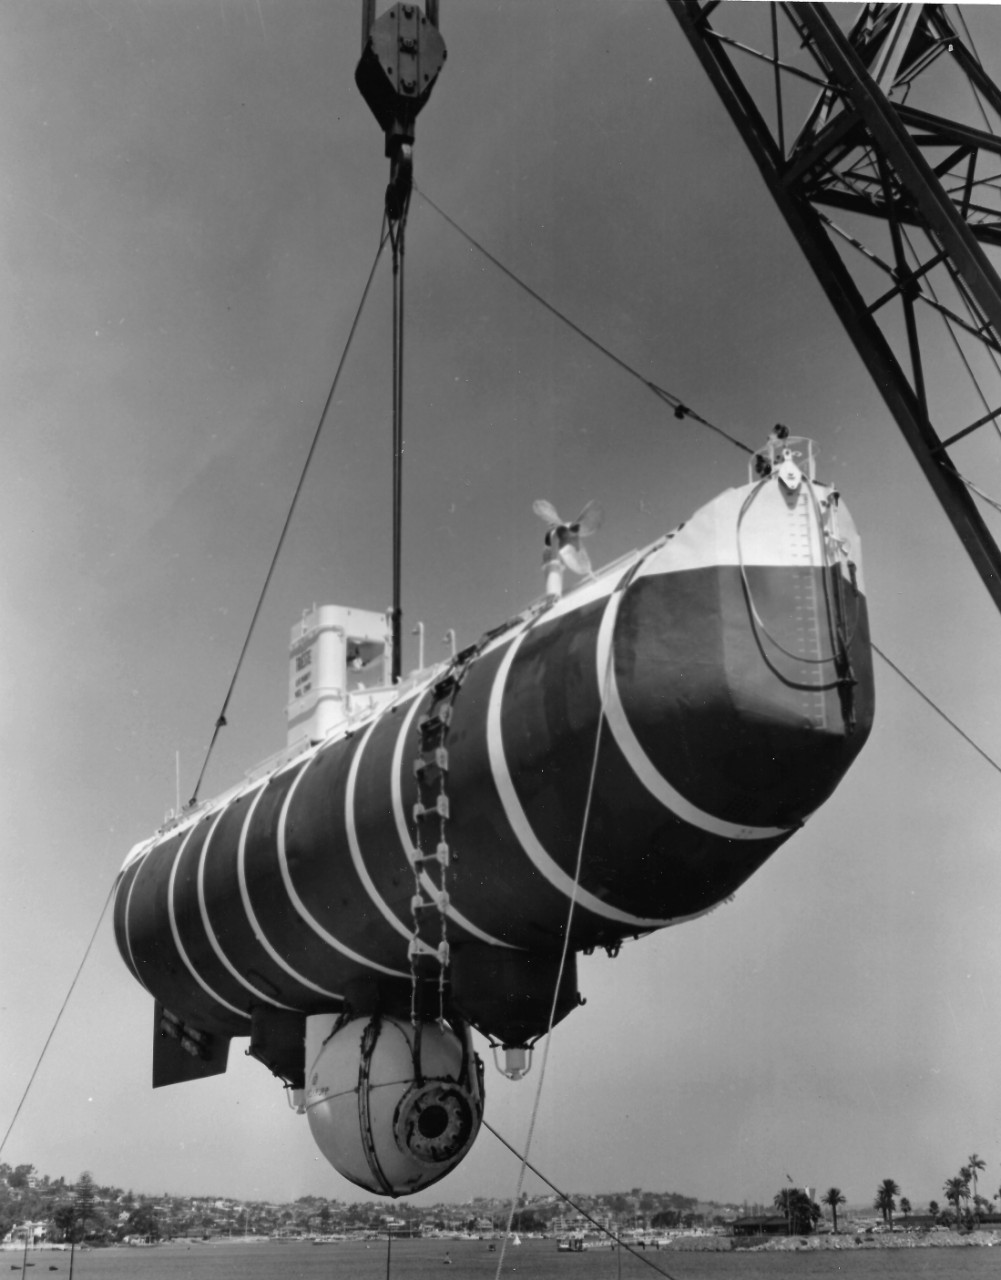 NMUSN-4624:  Bathyscaph Trieste, 1959.   Is hoisted by a floating crane, possibly during testing by the Naval Electronics Laboratory in San Diego, California.    National Museum of the U.S. Navy Photograph Collection. 